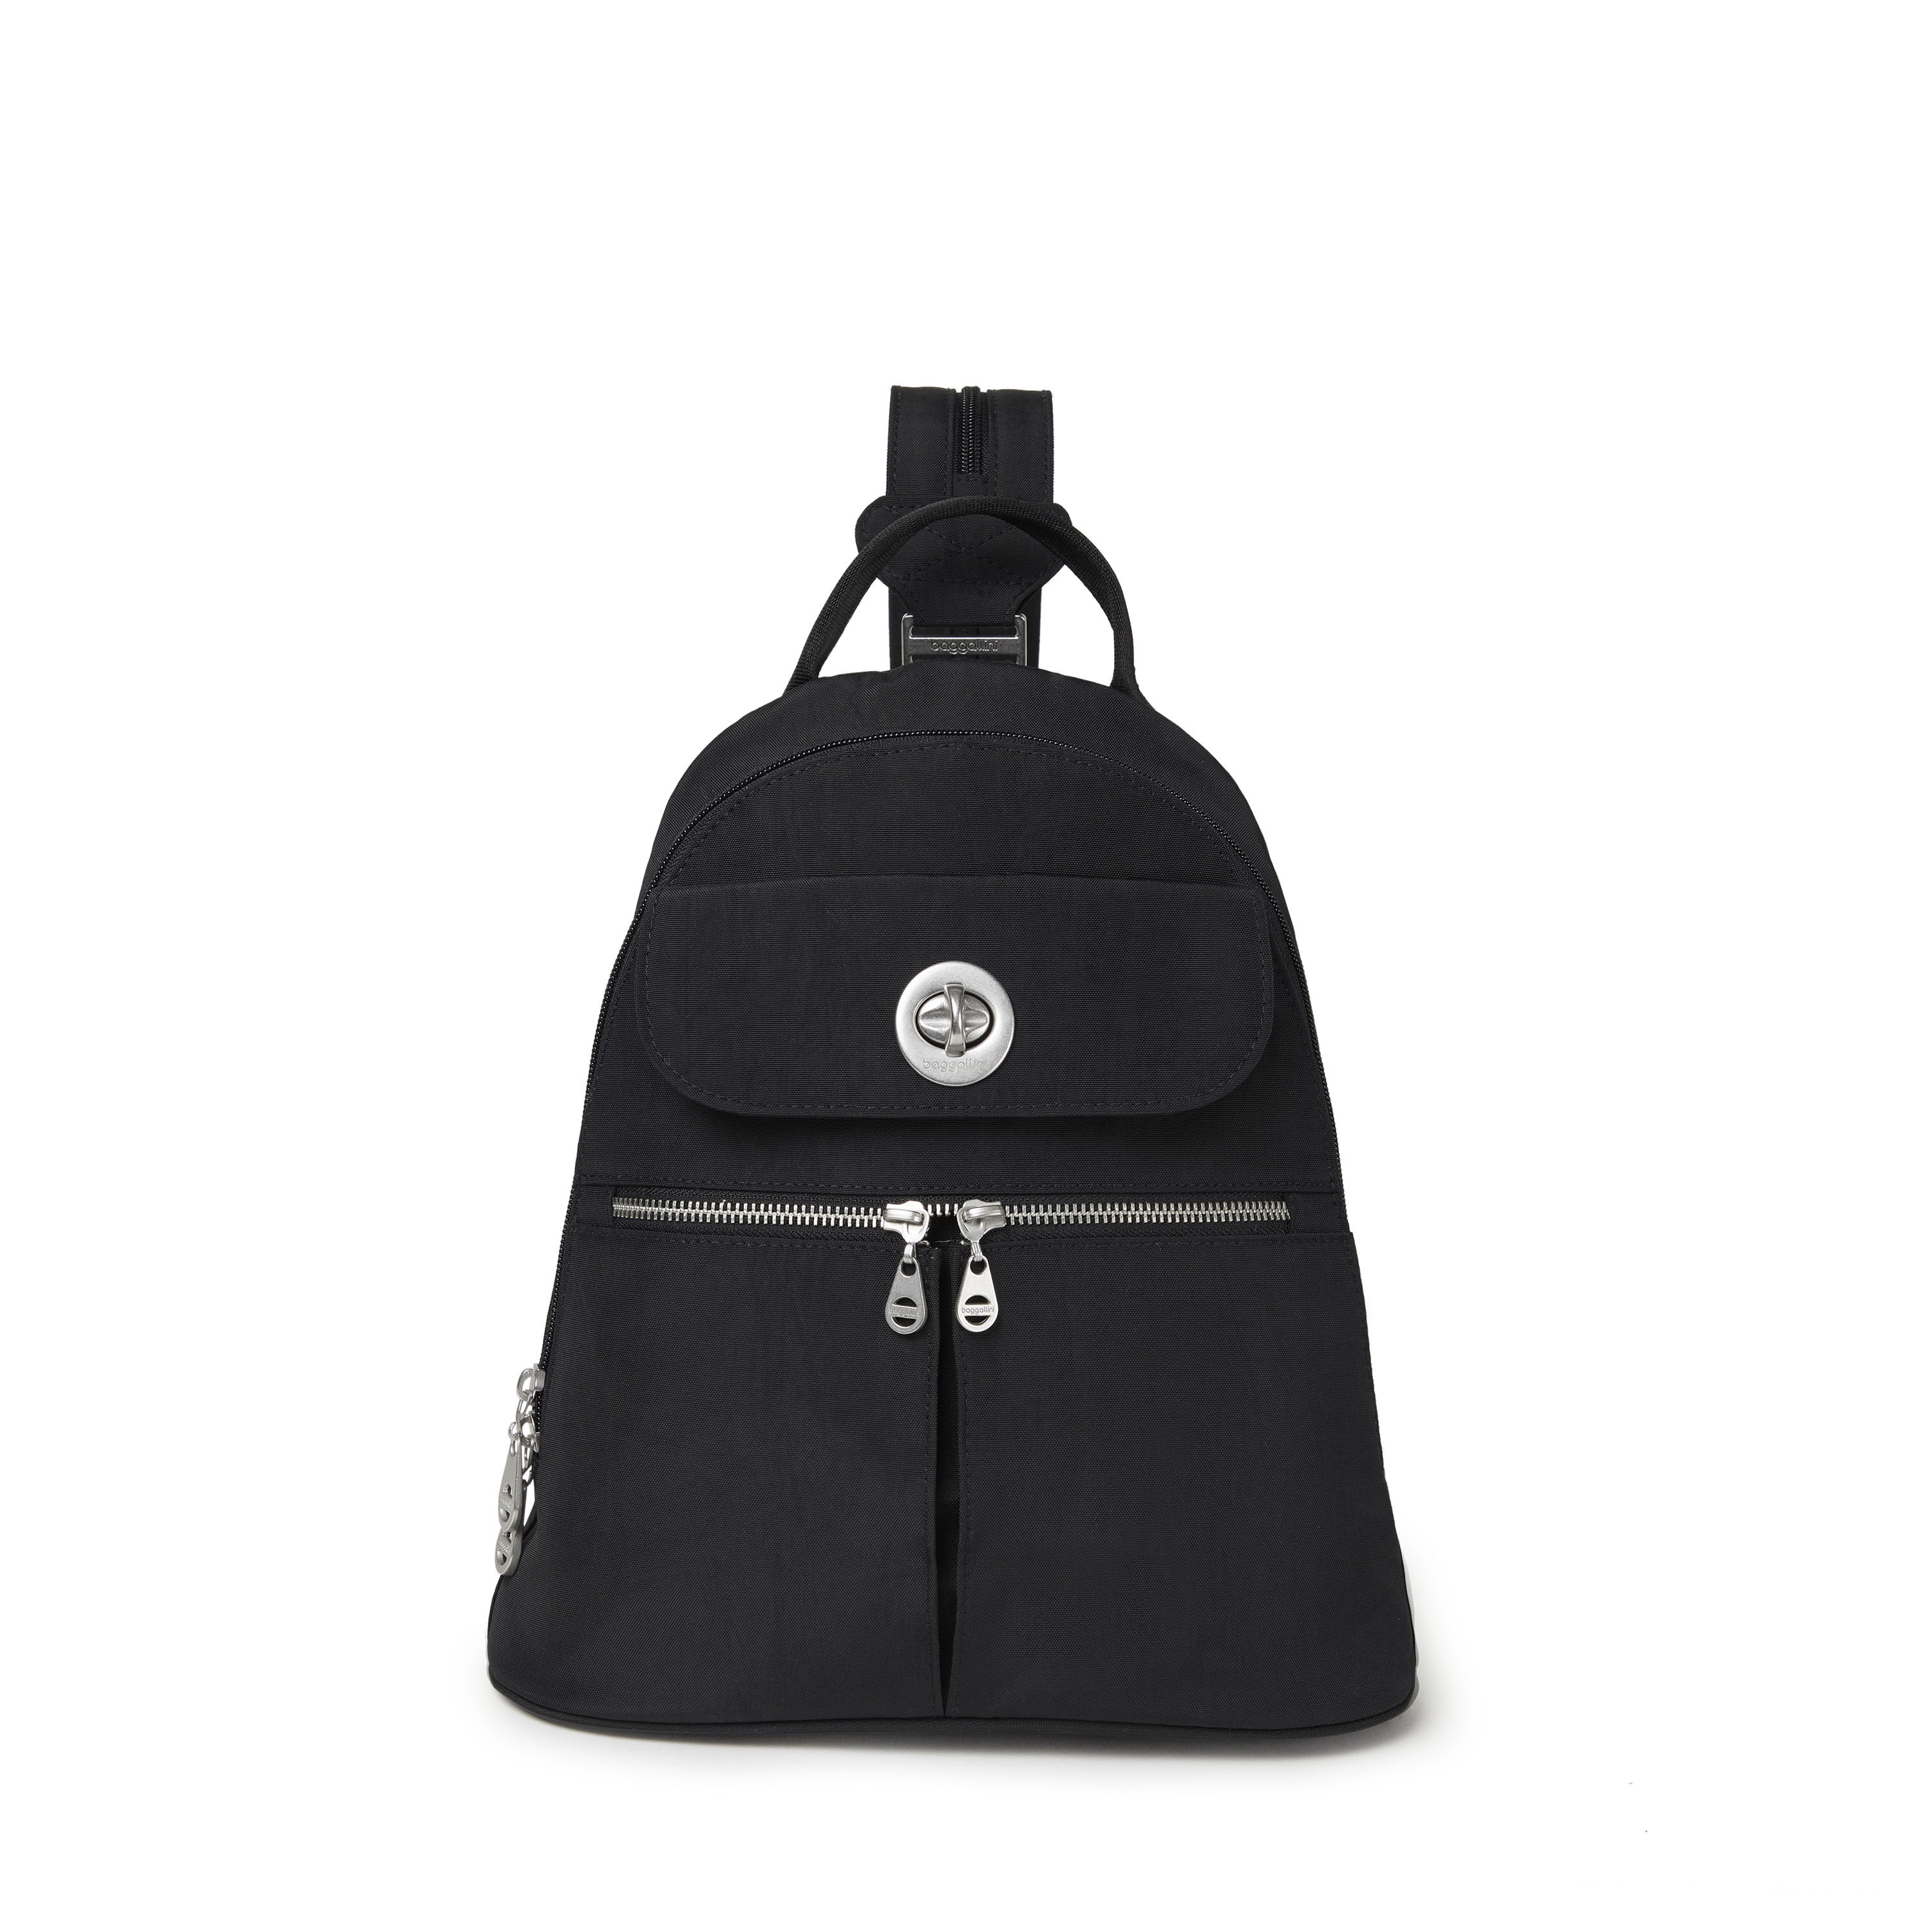 naples convertible backpack